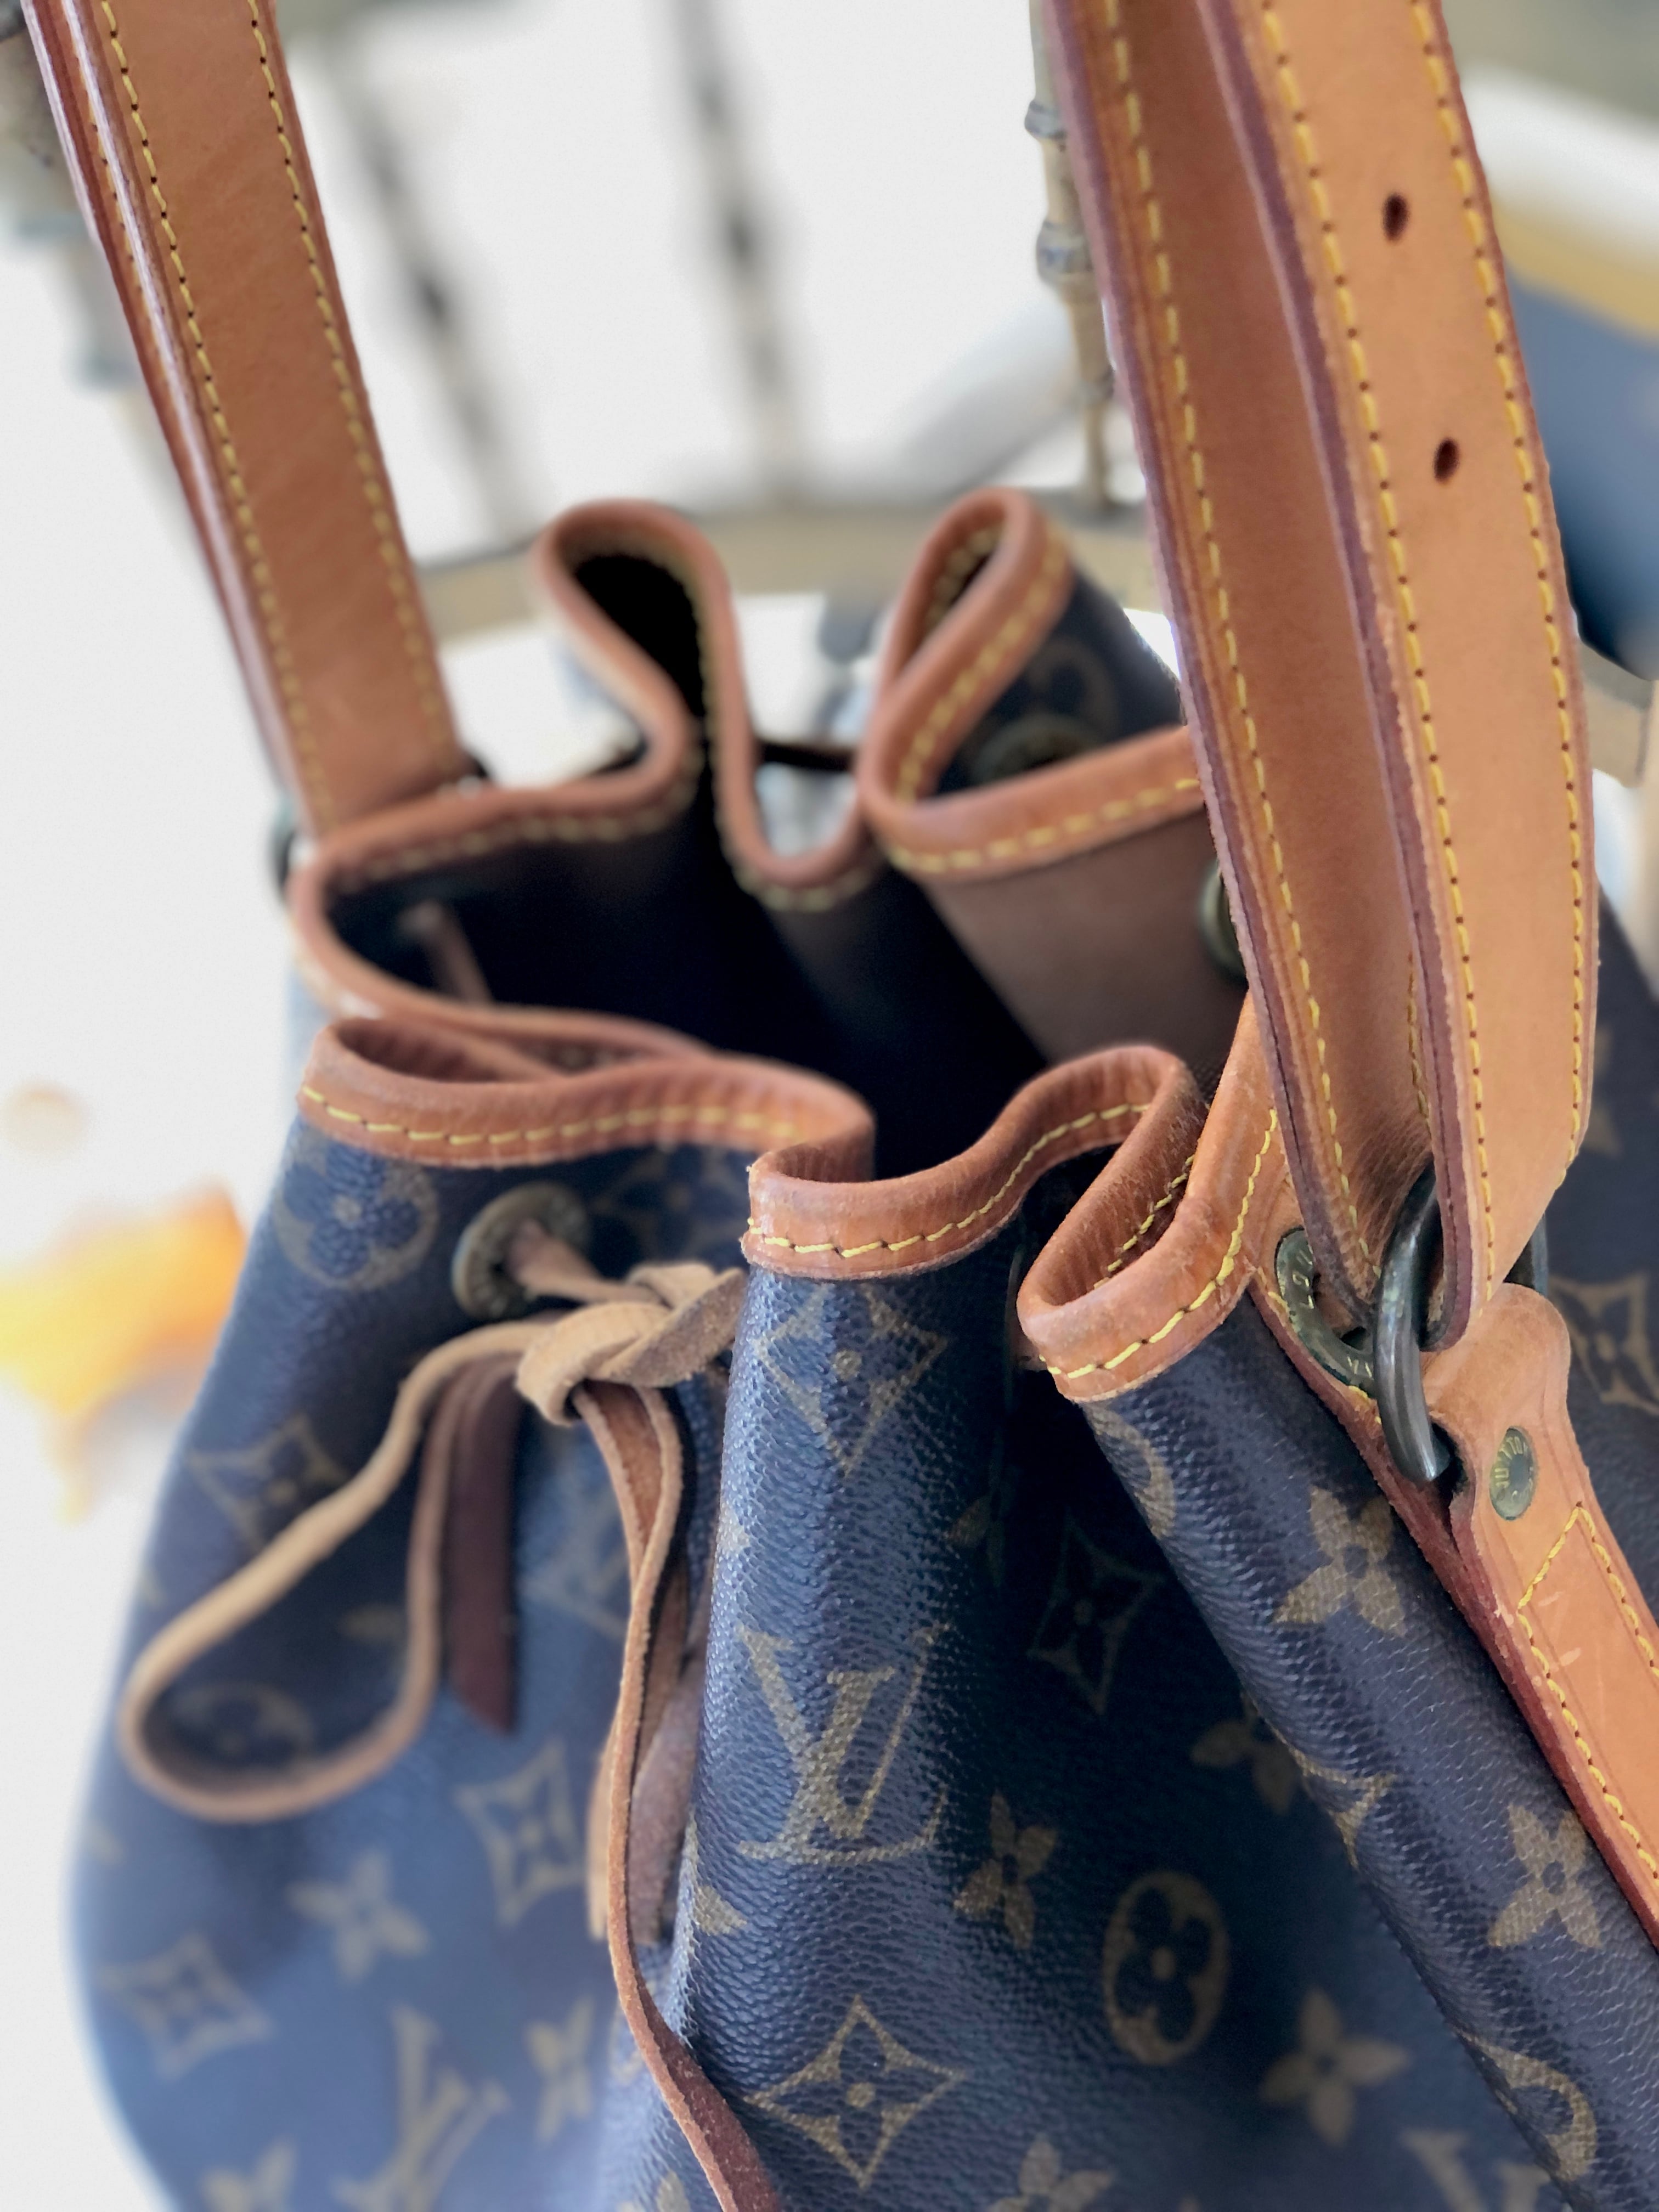 LOUIS VUITTON 　ルイ ヴィトン　モノグラム 　M42224　ノエ　巾着　ショルダーバッグ　ブラウン　vintage　ヴィンテージ 　 m7wx8x | VintageShop solo powered by BASE